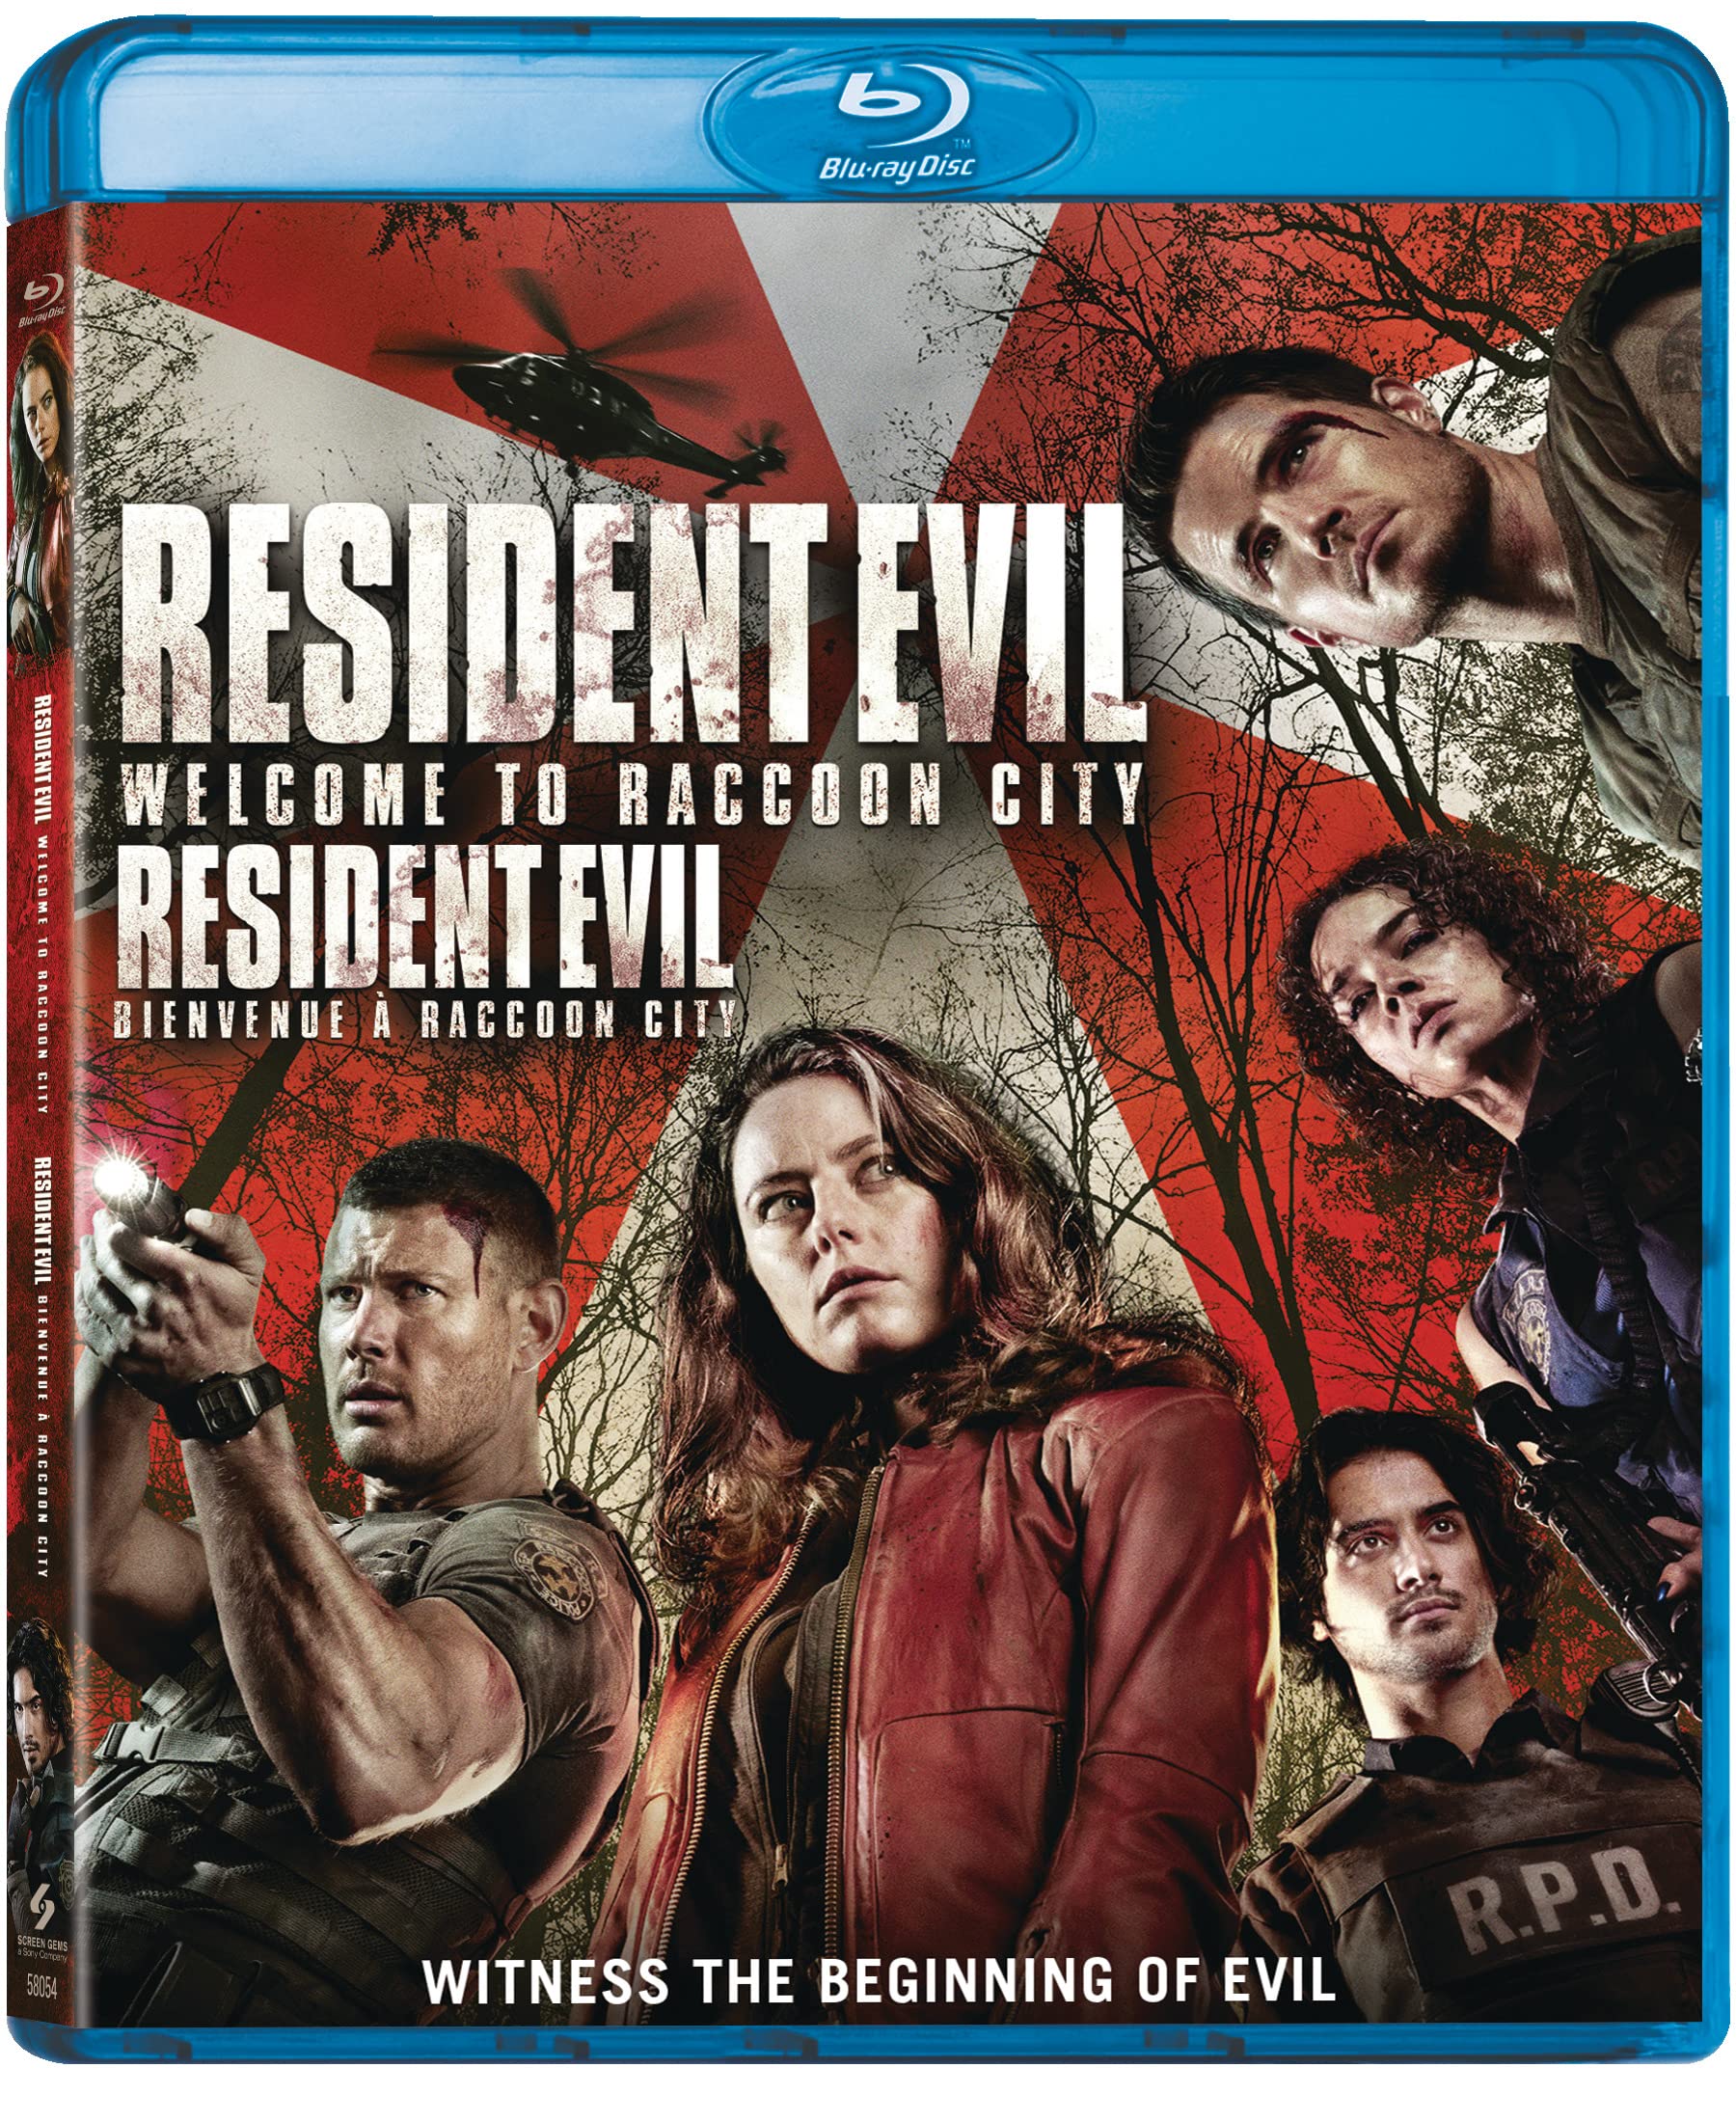 RESIDENT EVIL:  WELCOME TO RACCOON CITY – BILINGUAL – BLU-RAY (RESIDENT EVIL: BIENVENUE À RACCOON CITY) on MovieShack